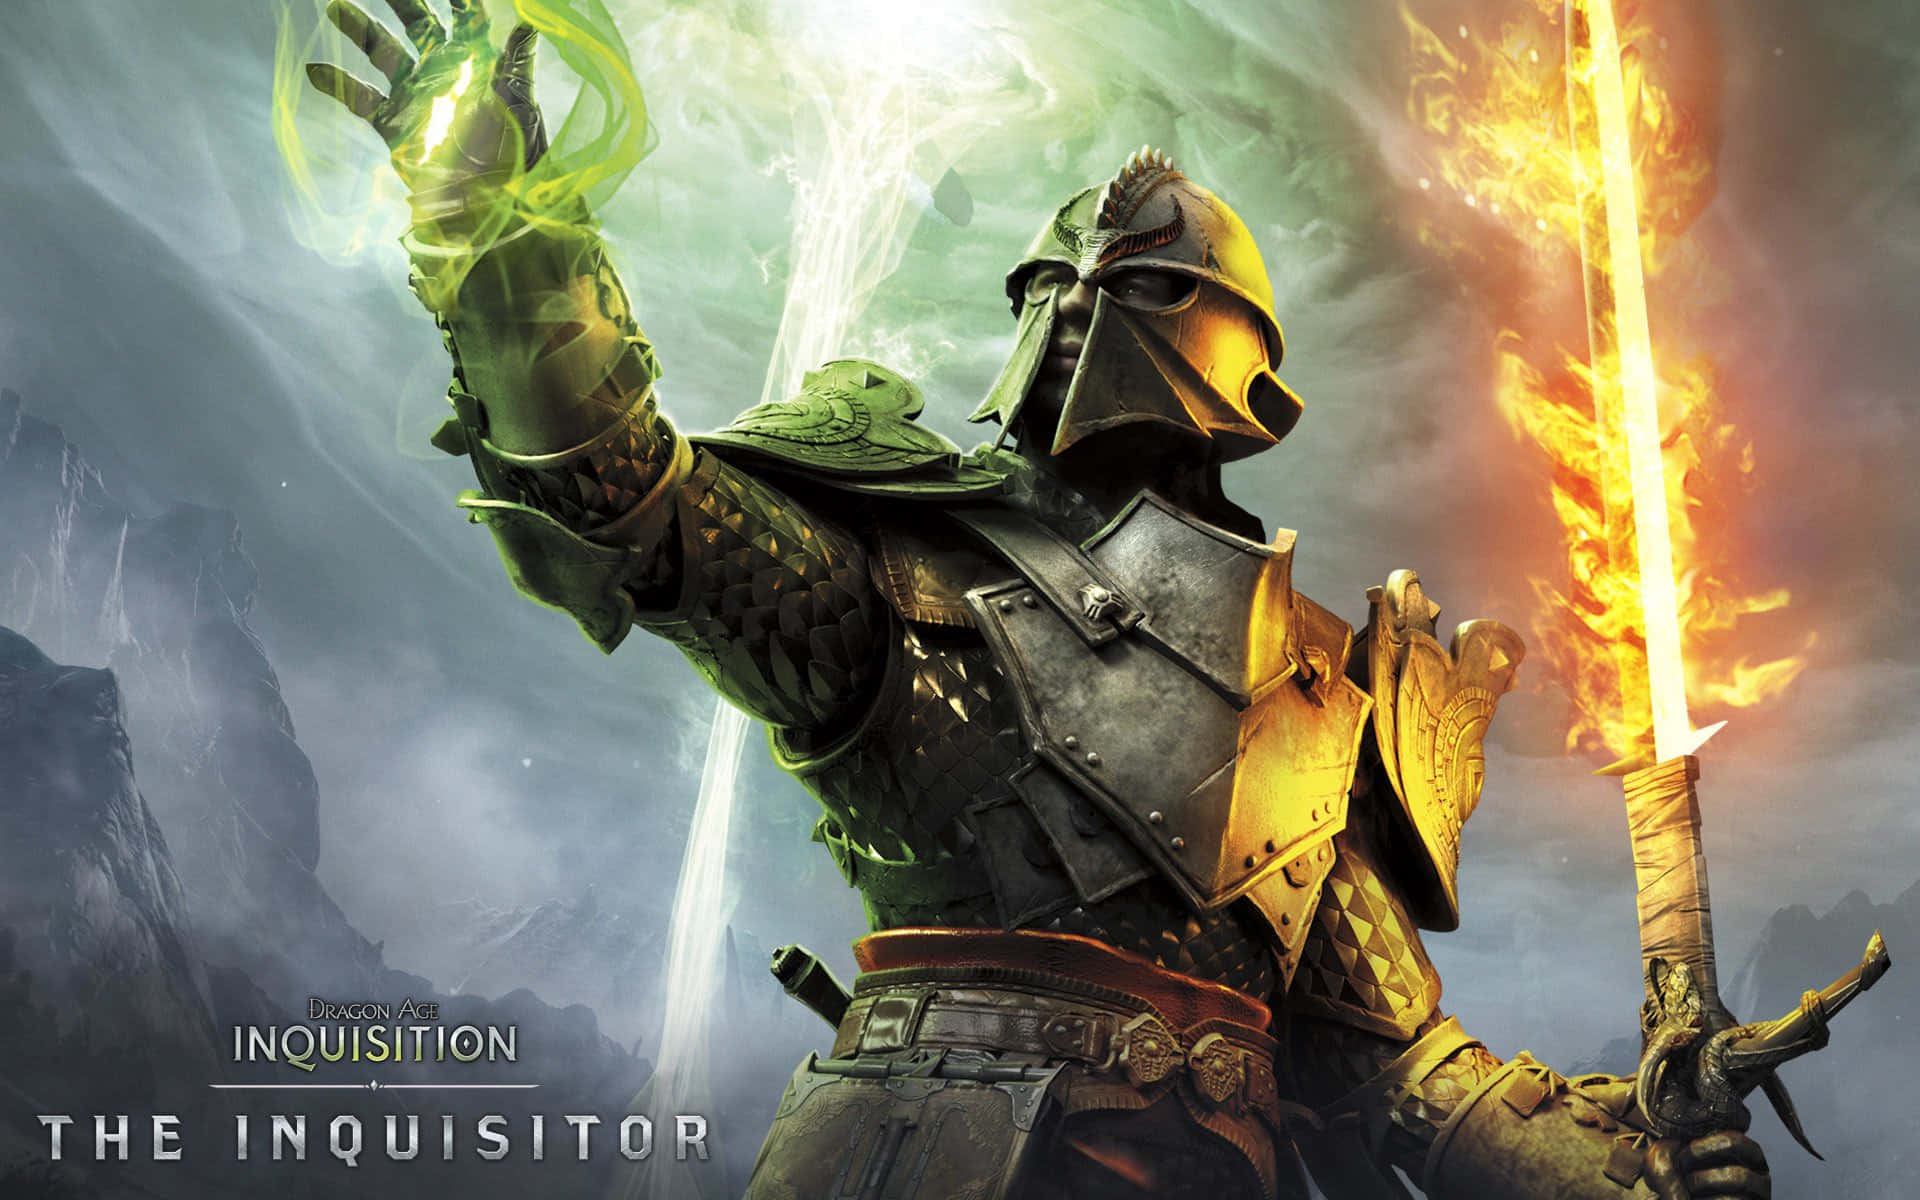 Command Your Squad for Victory in Dragon Age Inquisition